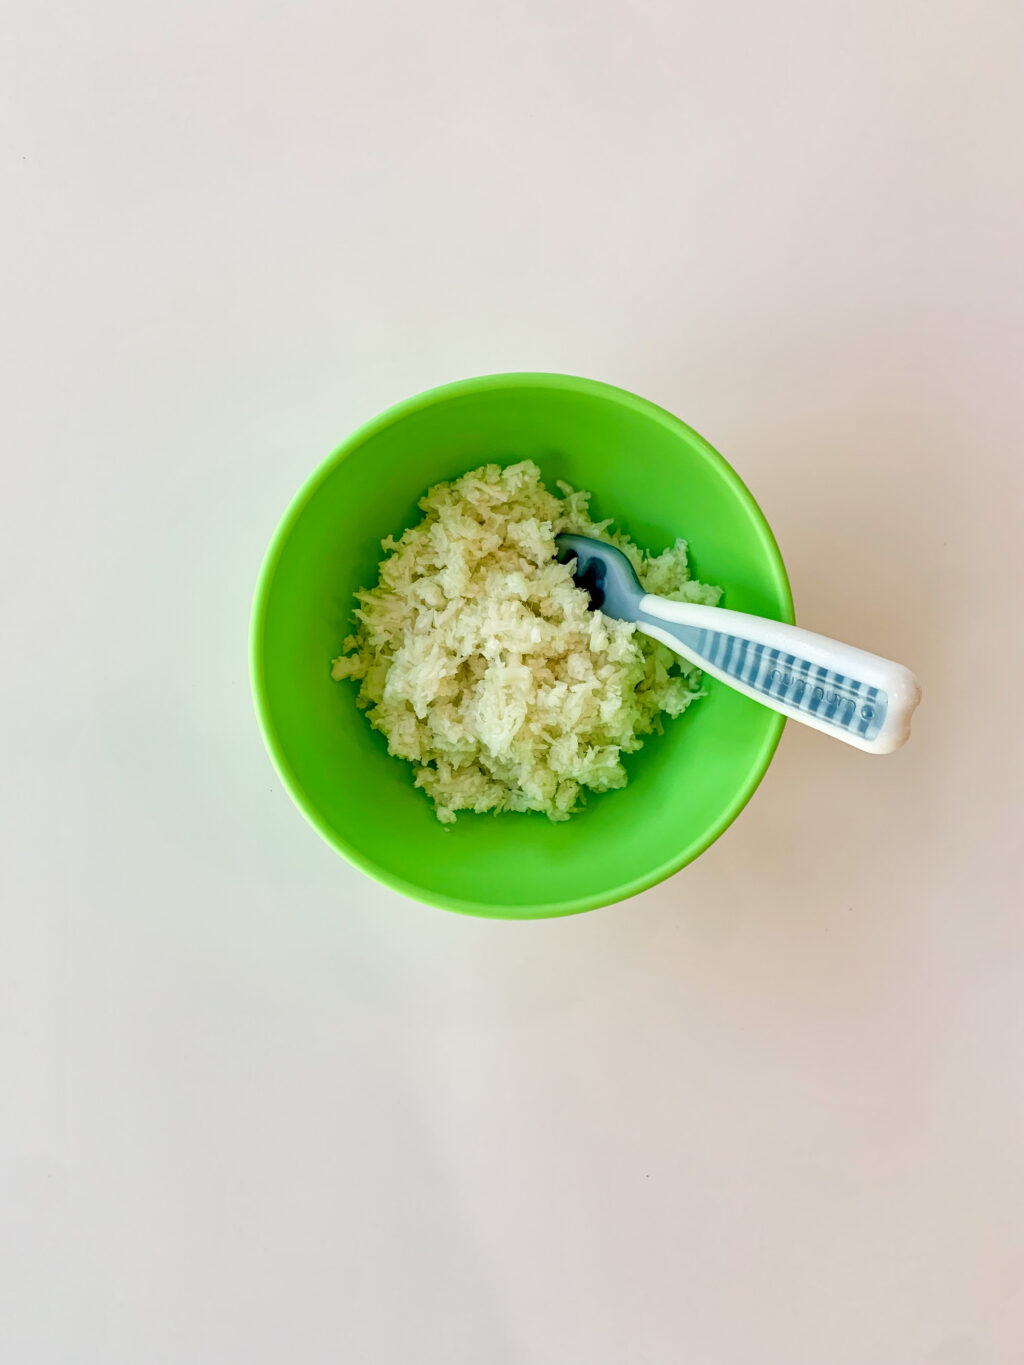 mashed cooked cauliflower in a green bowl with baby spoon